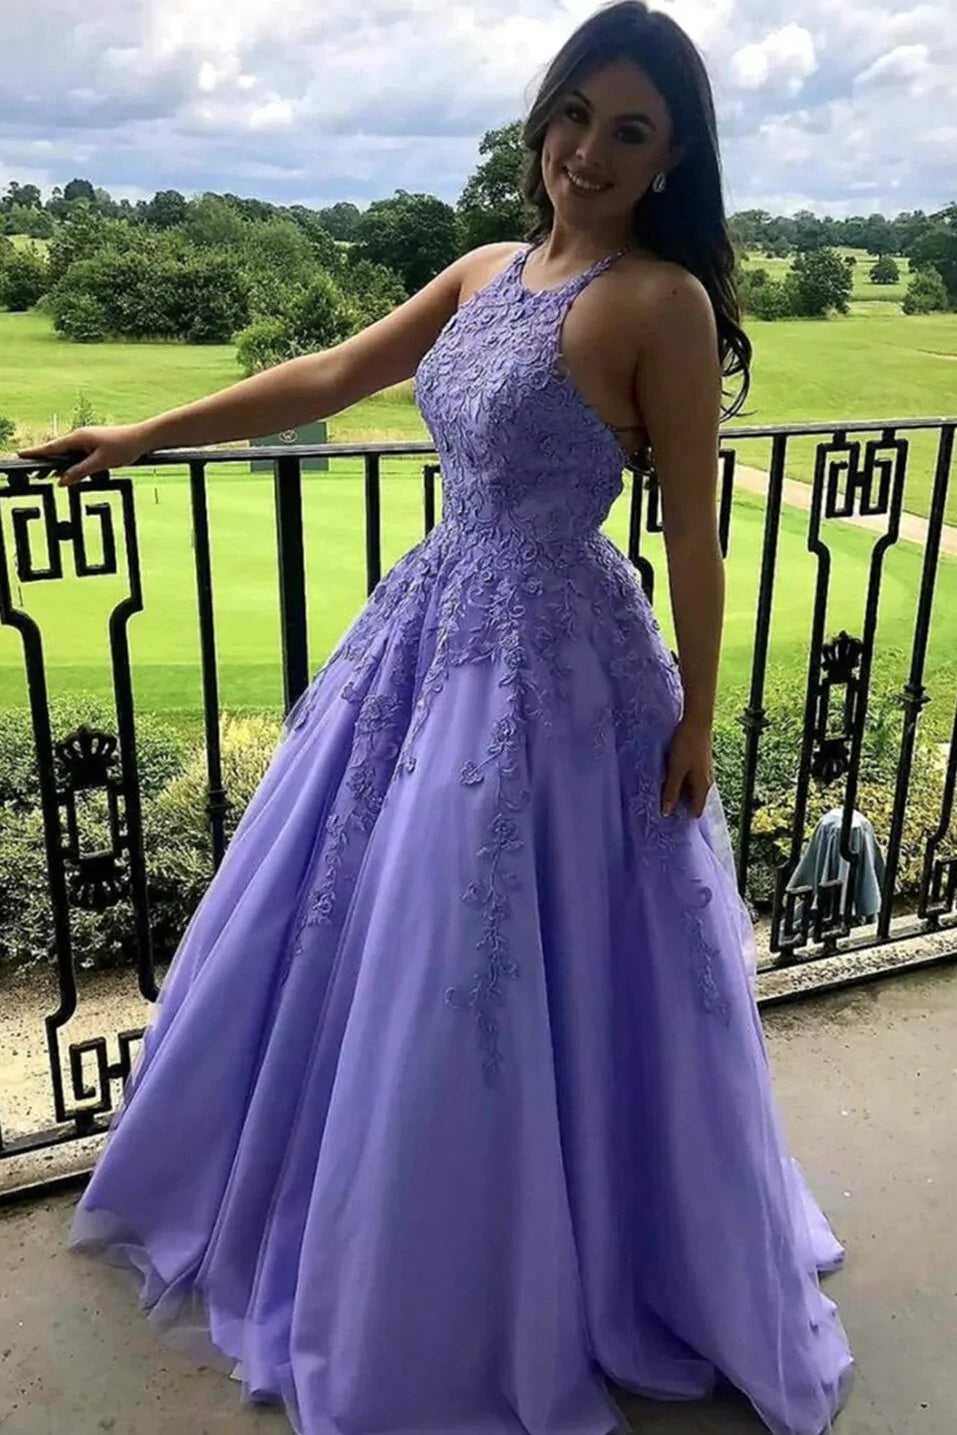 Prom Dresses for Busty Figures, Sexy Halter Gowns